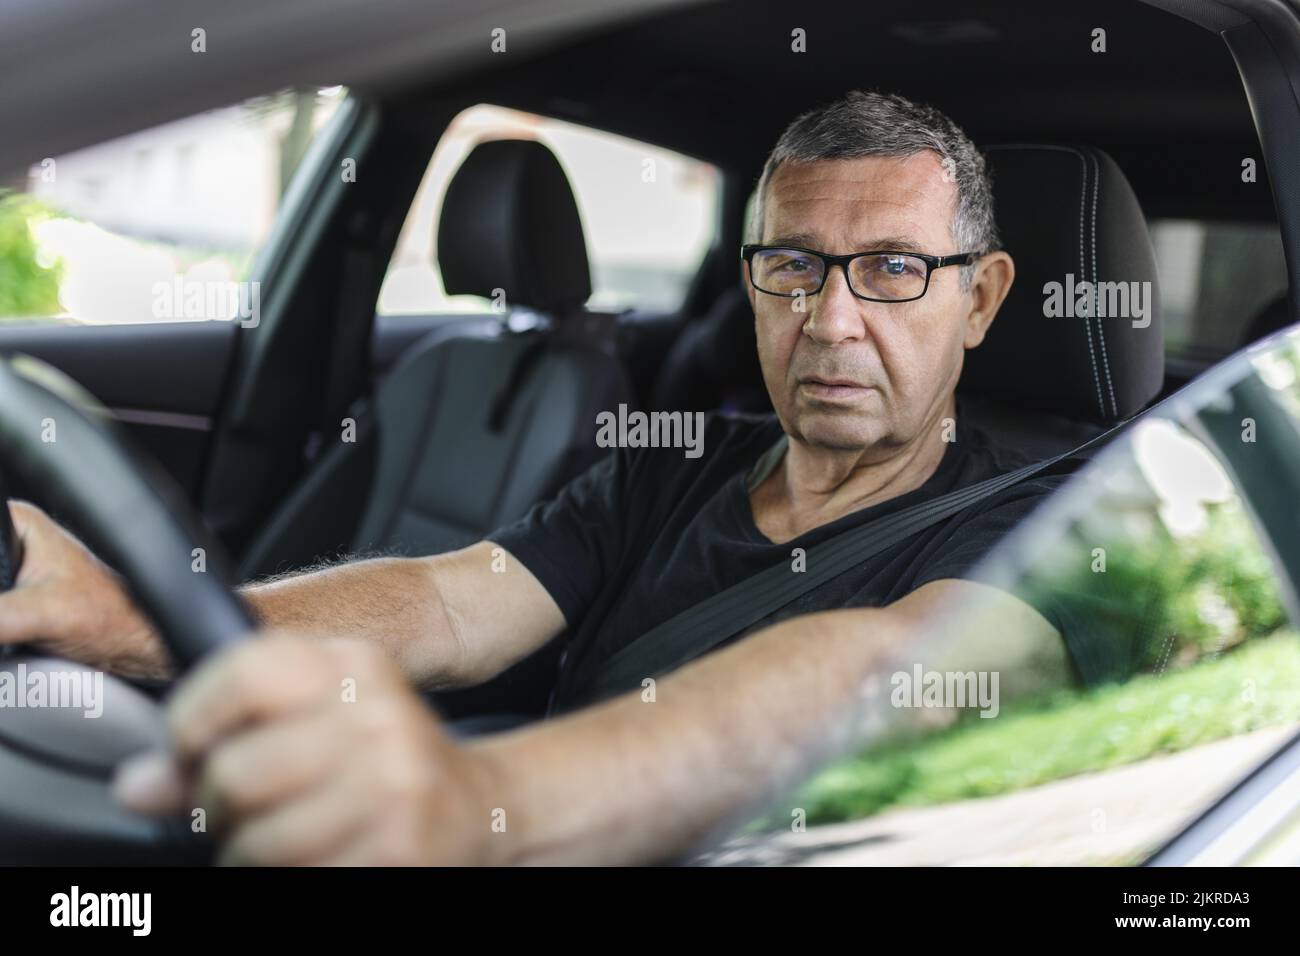 Happy senior in his 70s driving a car Stock Photo